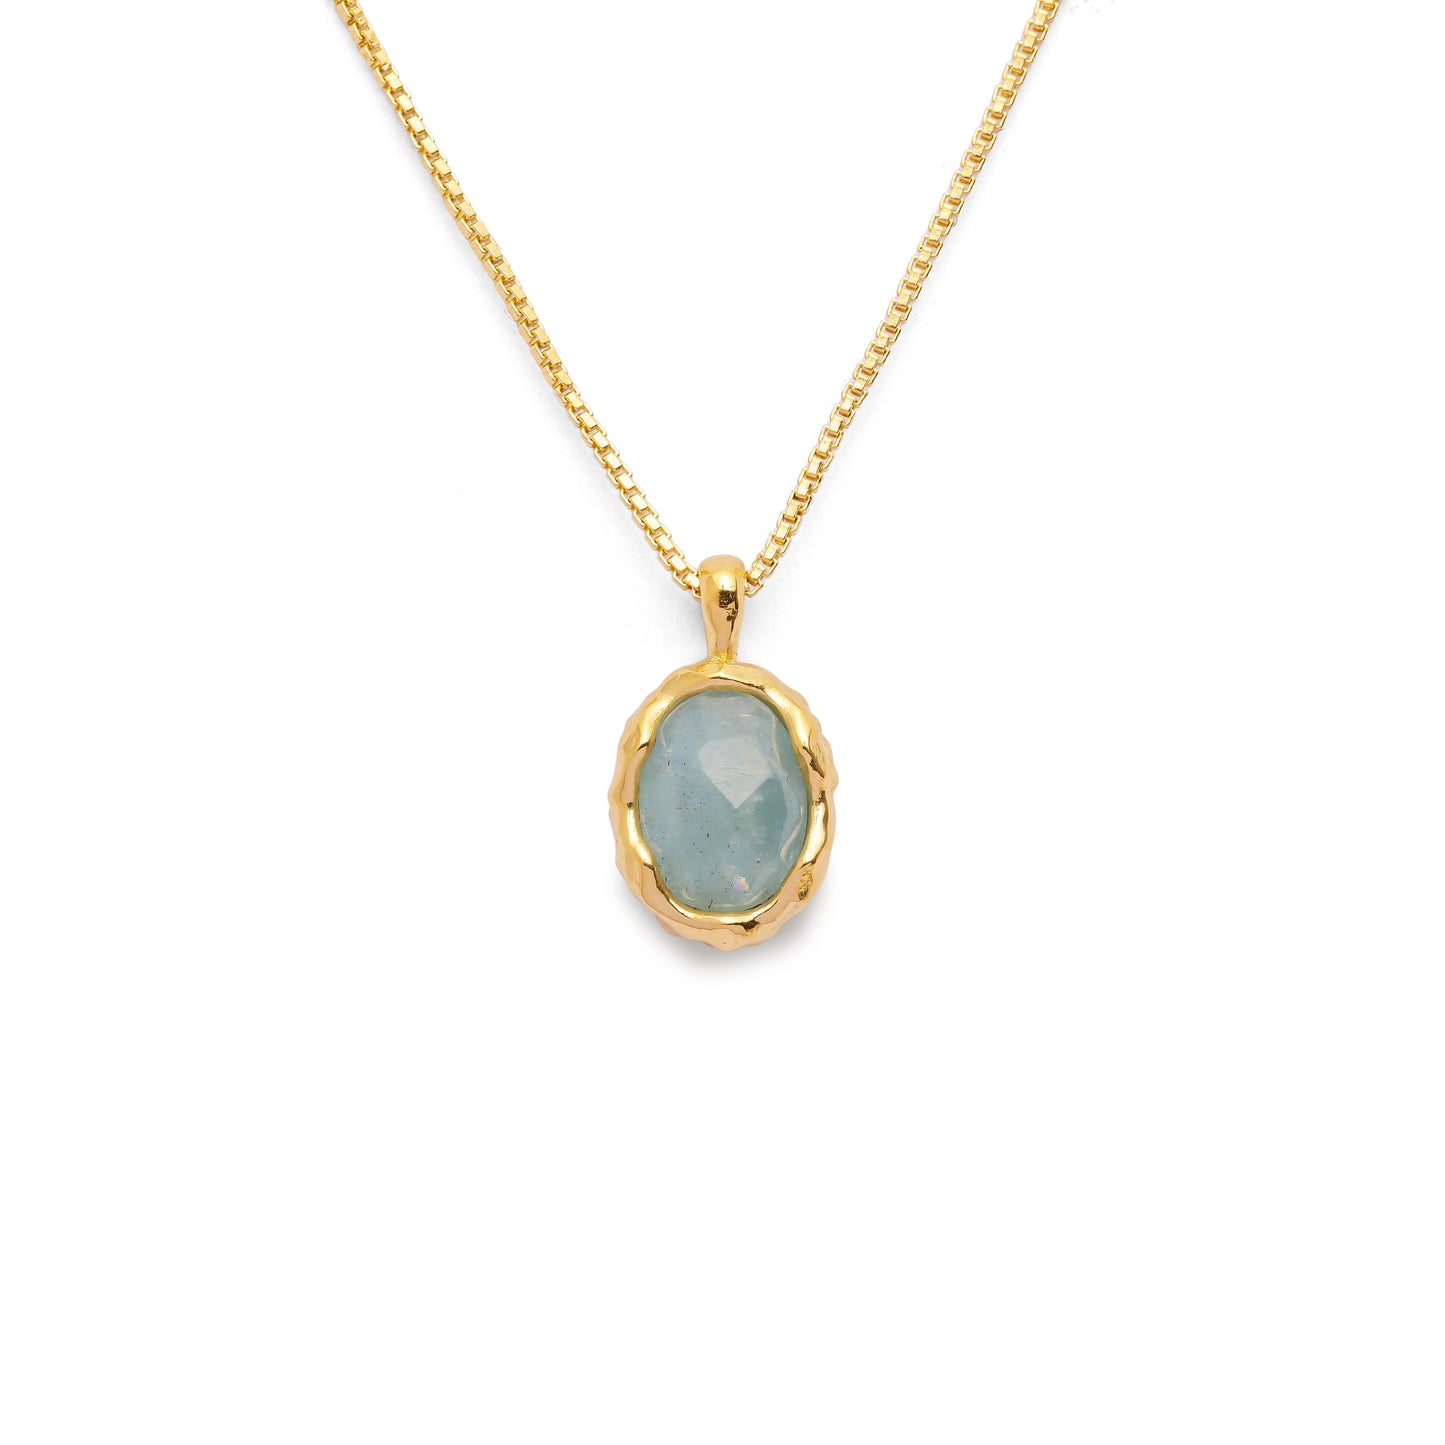 Aqua green oval aquamarine pendant with irregular faceting on an 18k gold vermeil box chain on a white background